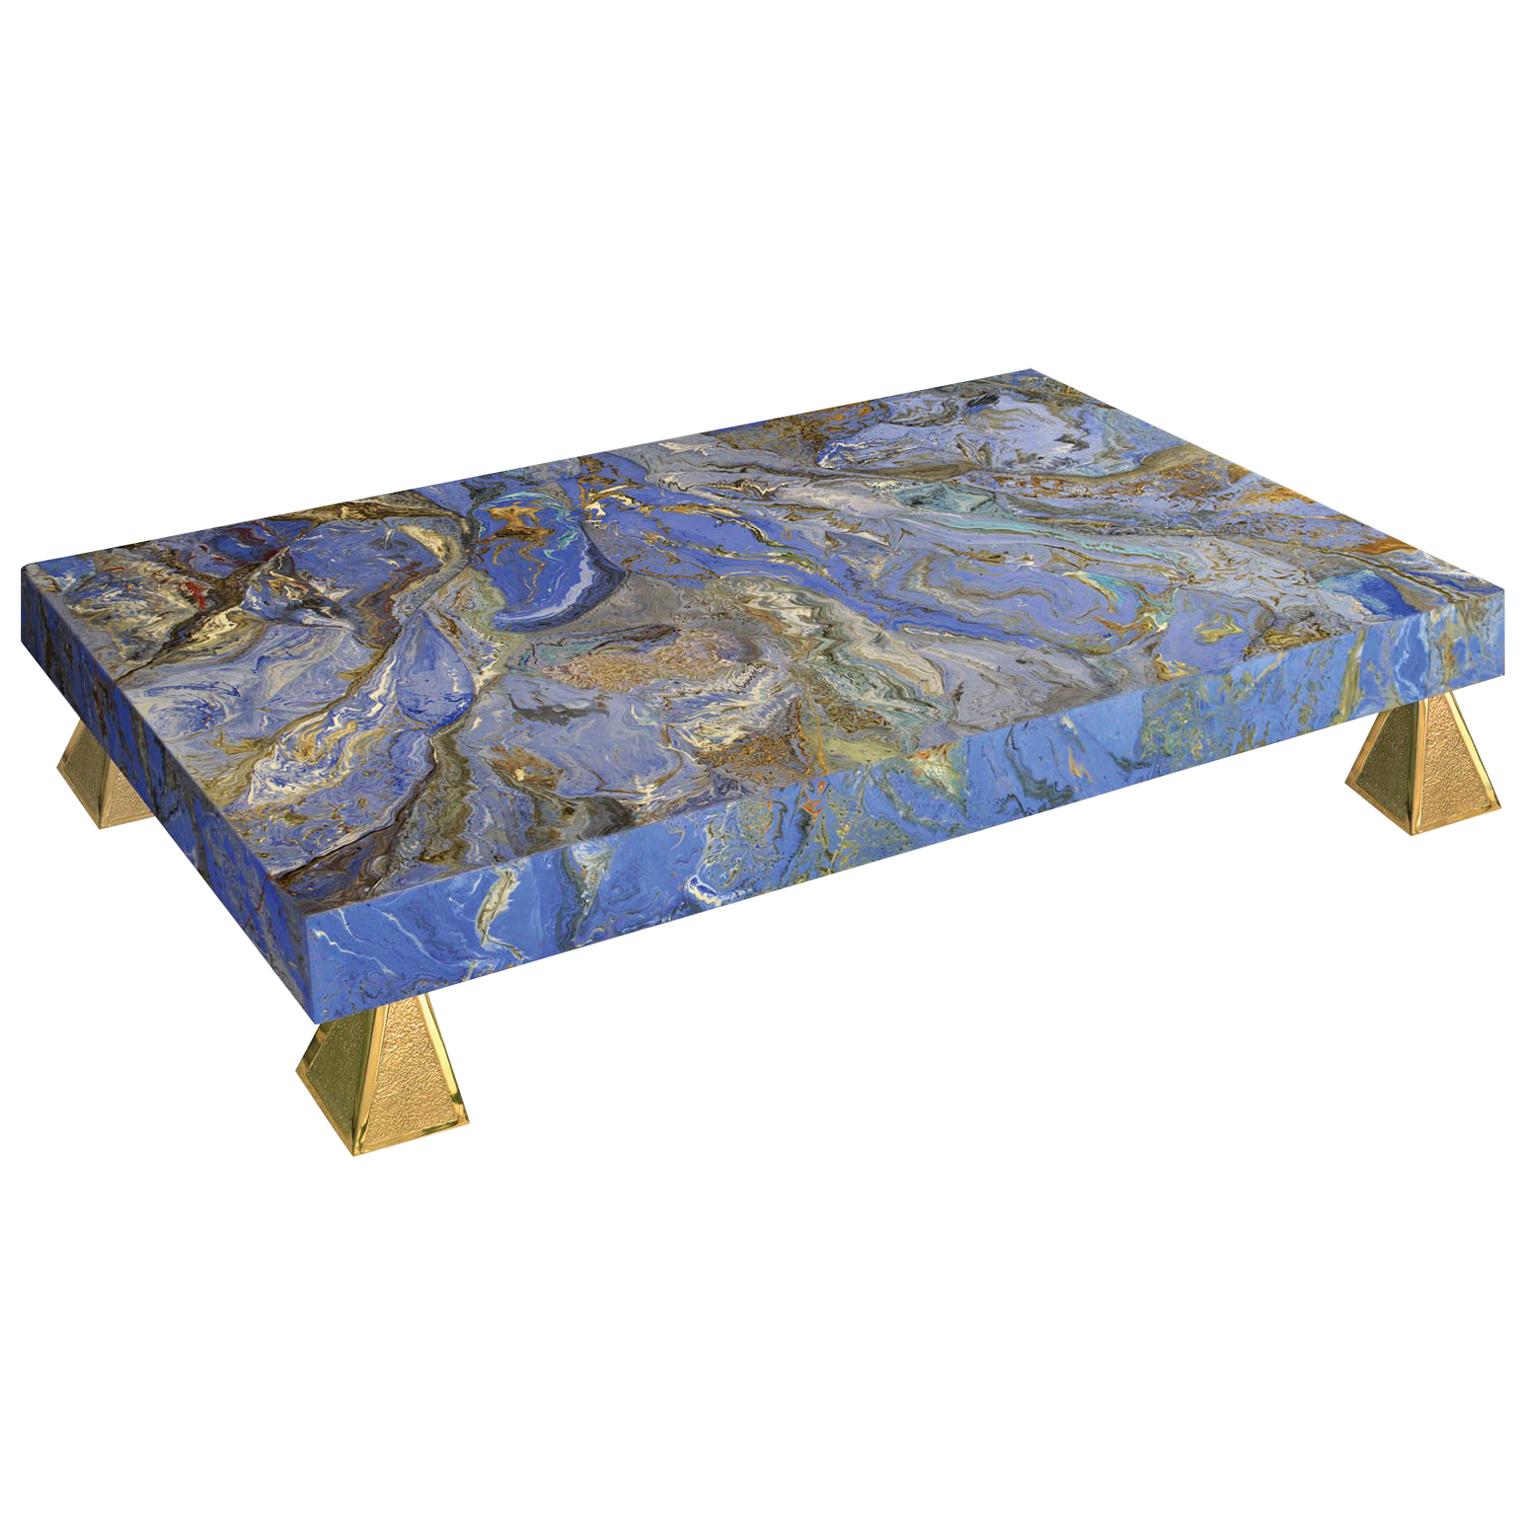 Modern Blue Coffee Table handmade marbled Scagliola decoration Casted Brass Feet